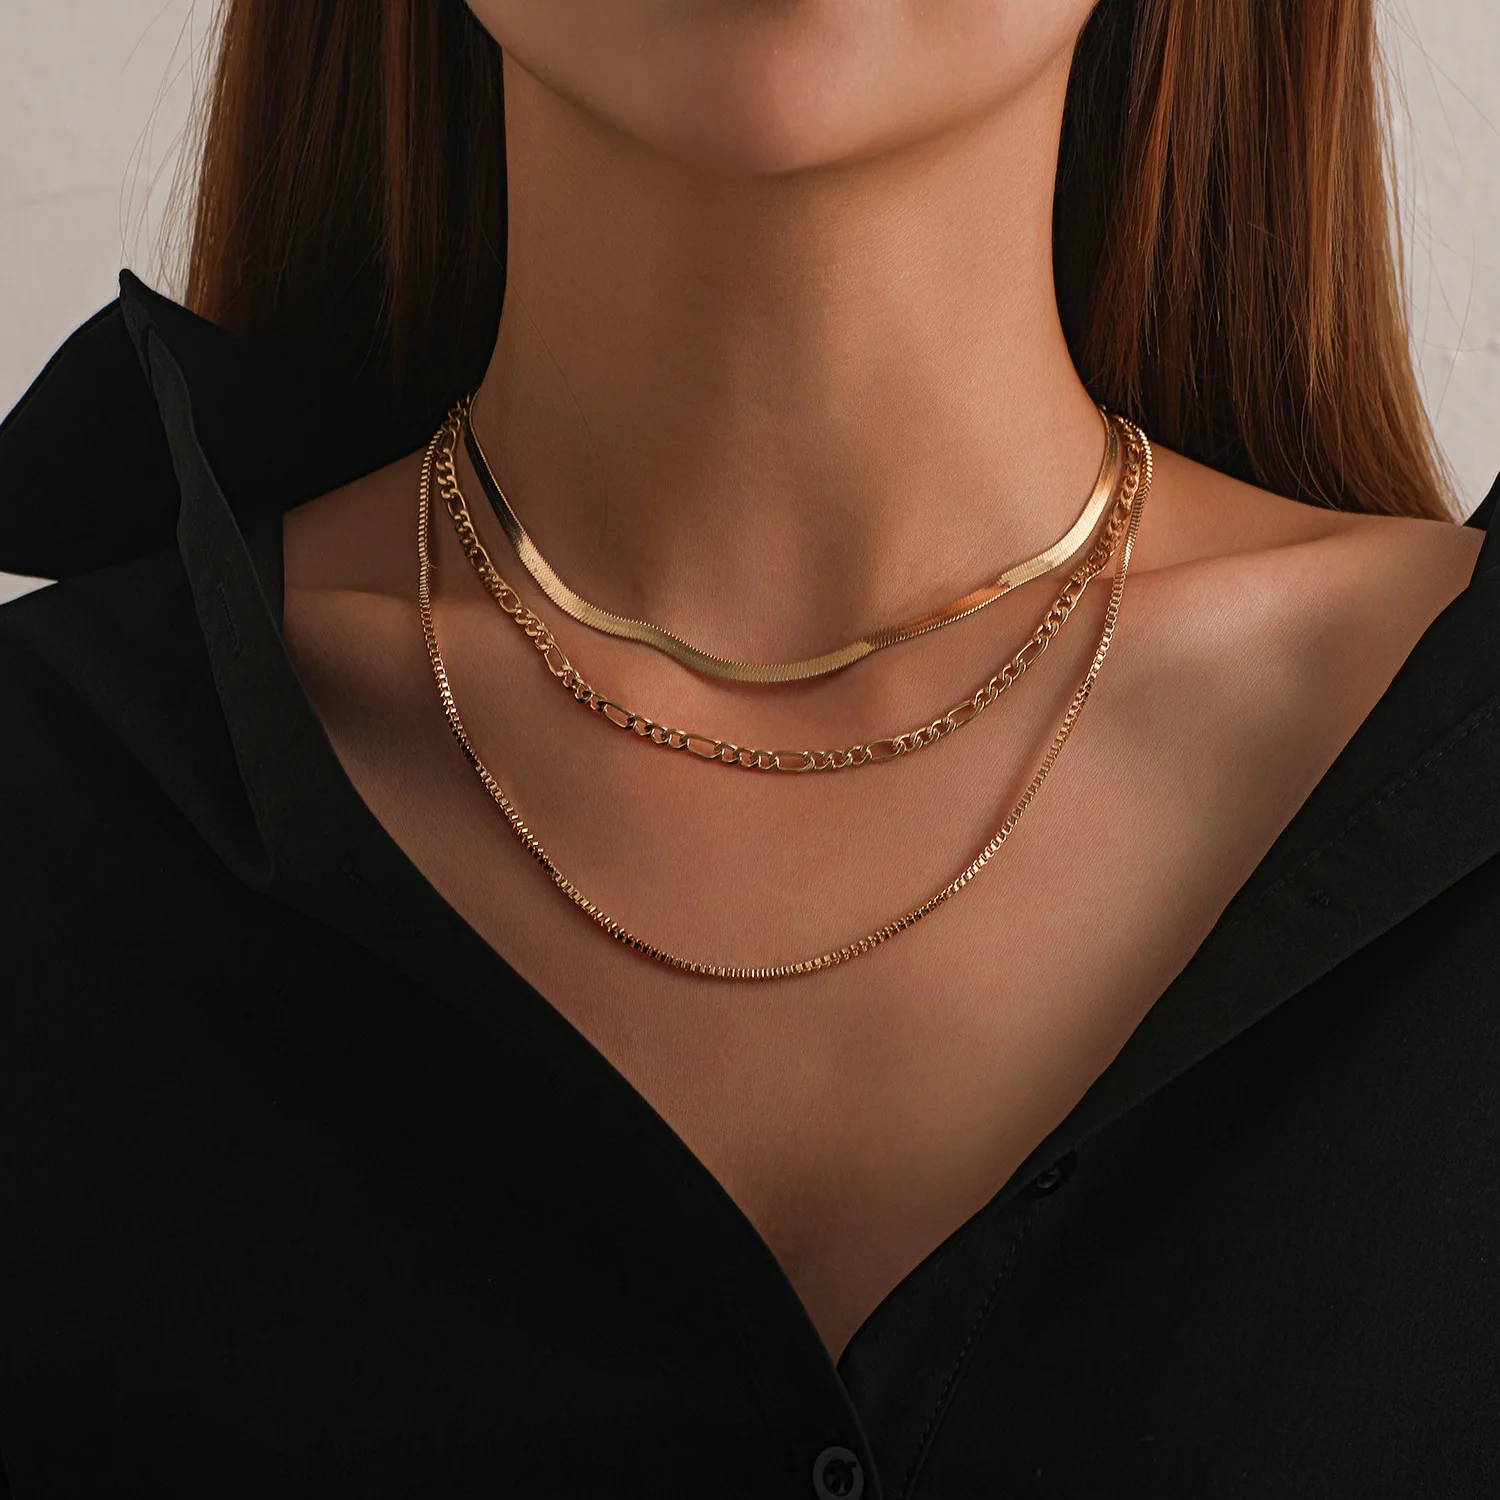 

Welwish 18k gold plated Multilayer Stainless Necklace Three Layer Snake Bone Chain Choker Flat Snake Chain Necklace For Women